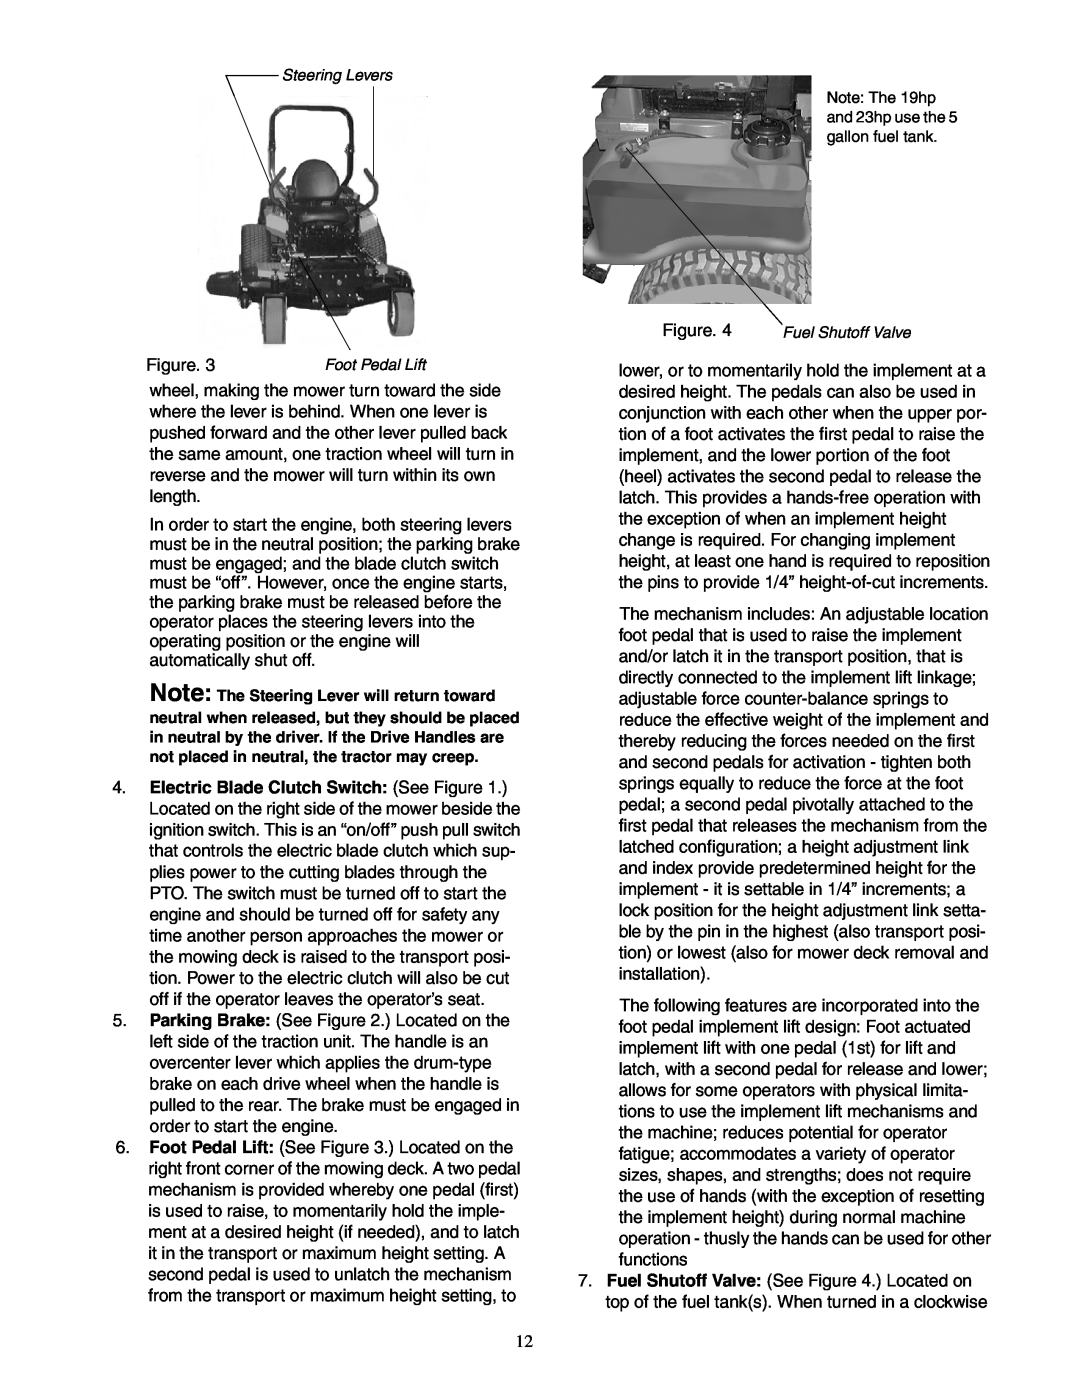 Cub Cadet 48-inch/54-inch/60-inch/72-inch service manual Steering Levers, Note The 19hp and 23hp use the 5 gallon fuel tank 